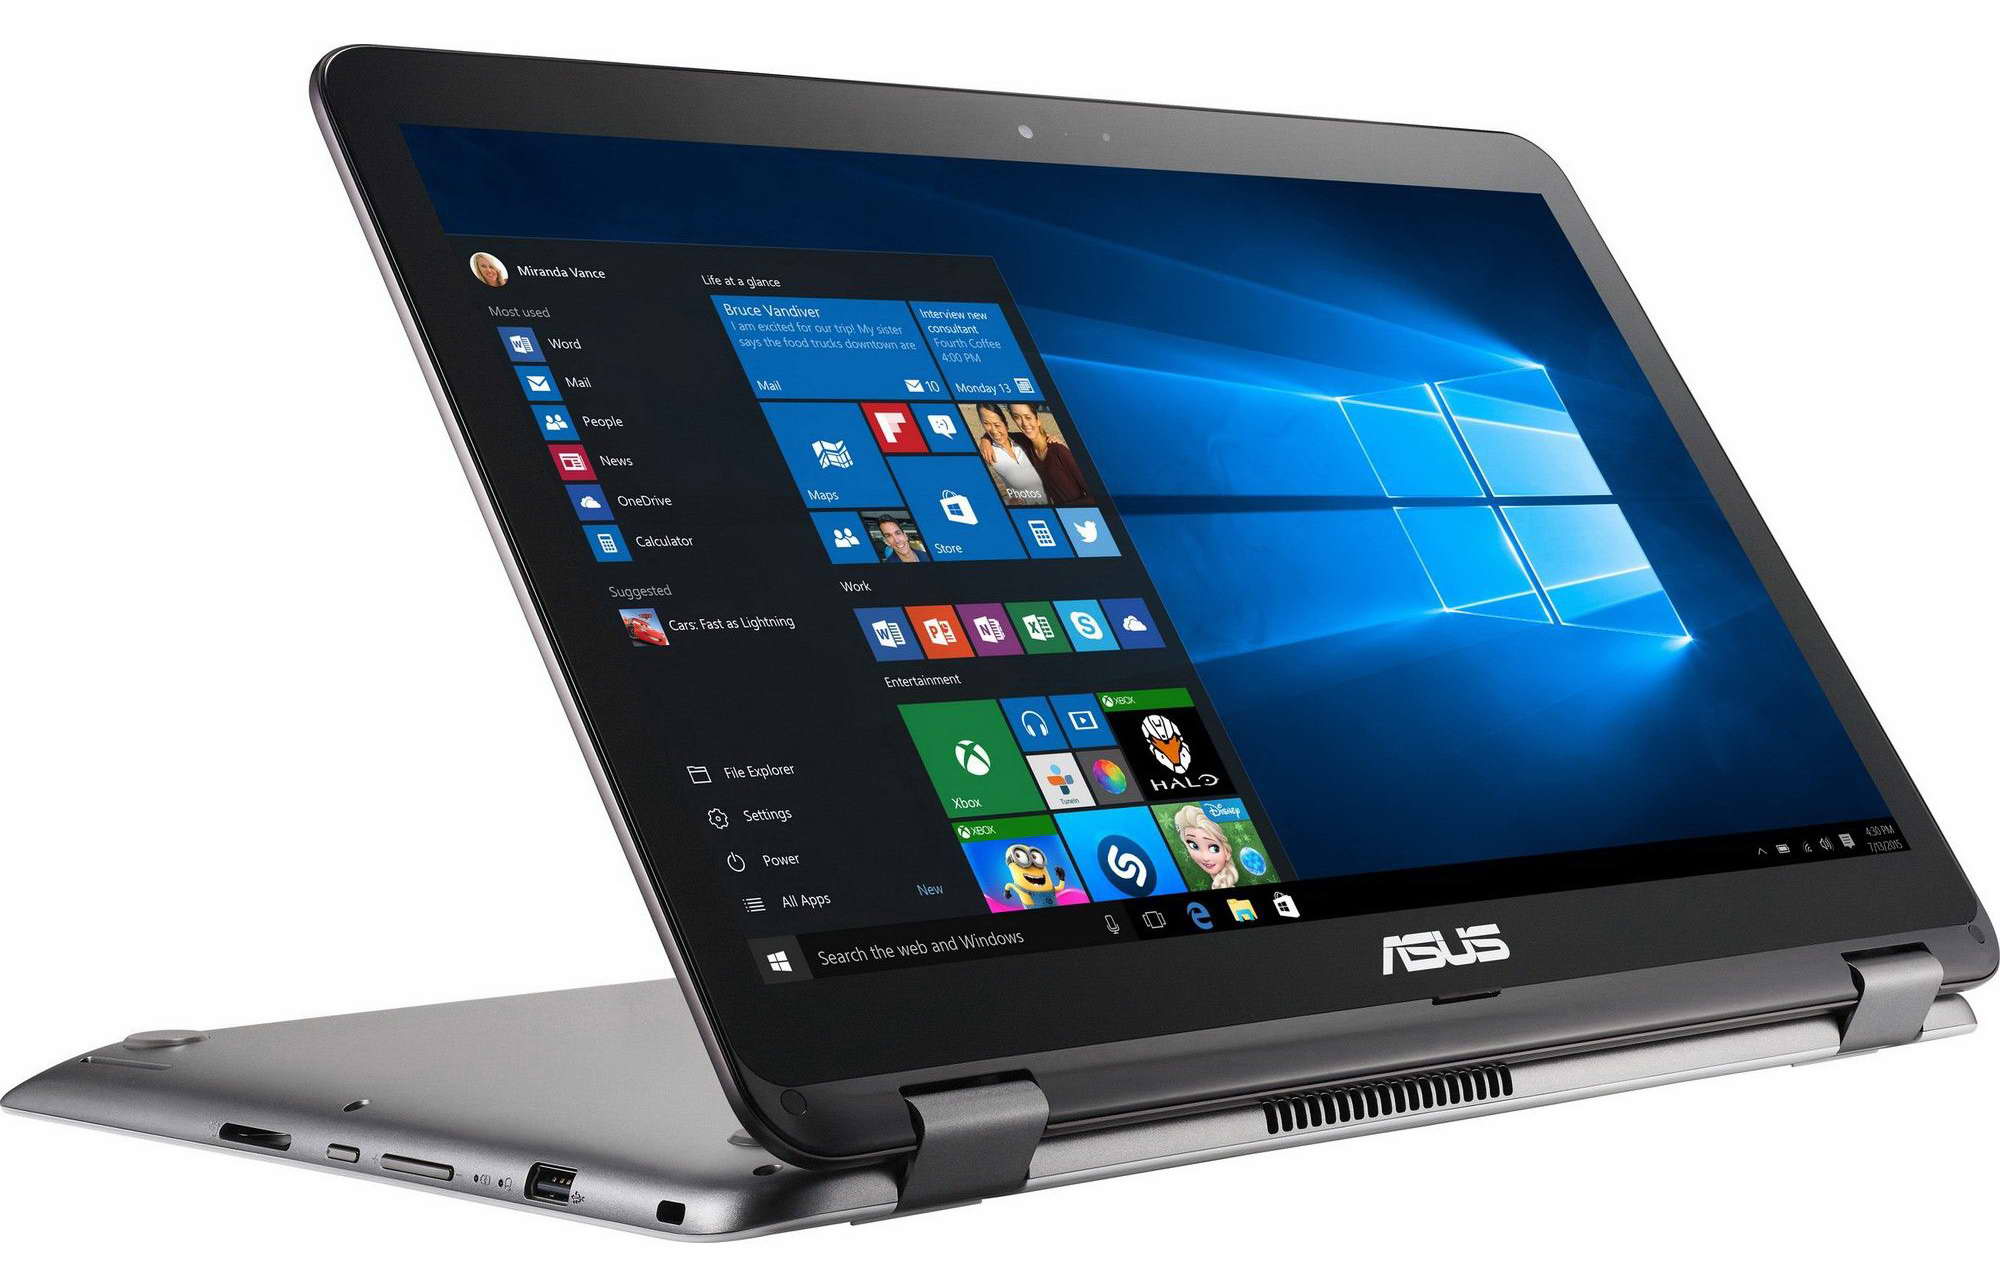 asus drivers for windows 7 64 bit free download x501a